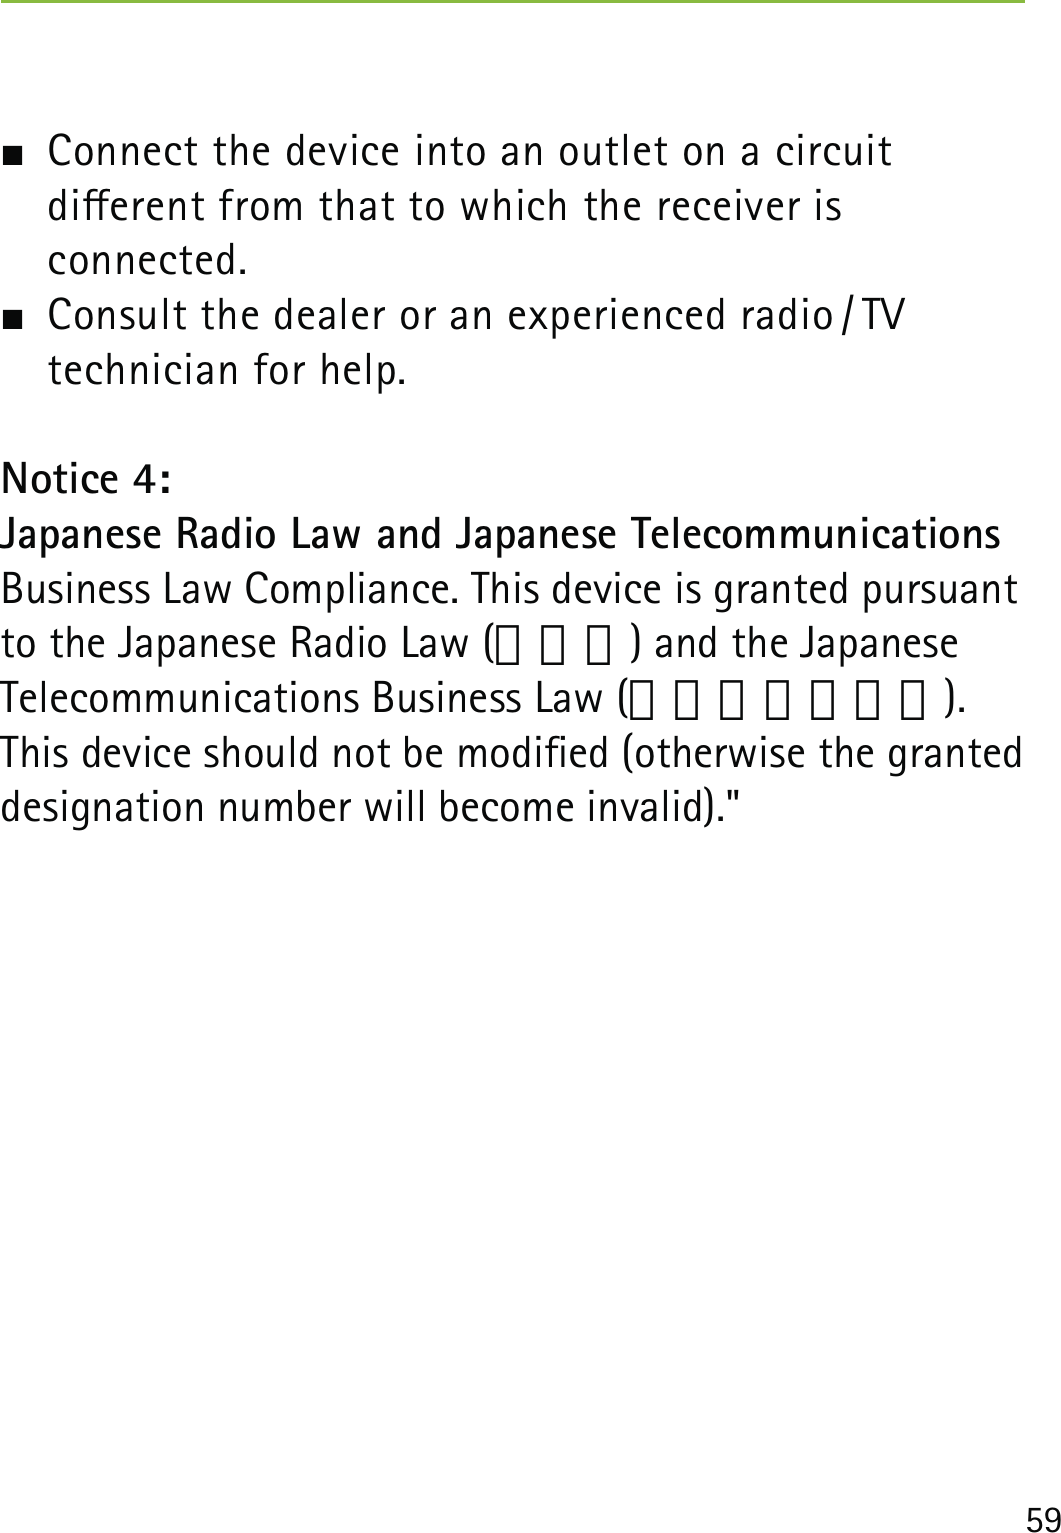 59  Connect the device into an outlet on a circuit  dierent from that to which the receiver is  connected.  Consult the dealer or an experienced radio / TV  technician for help.Notice 4:Japanese Radio Law and Japanese Telecommunications Business Law Compliance. This device is granted pursuant to the Japanese Radio Law (電波法) and the Japanese Telecommunications Business Law (電気通信事業法).This device should not be modied (otherwise the granted designation number will become invalid).&quot;